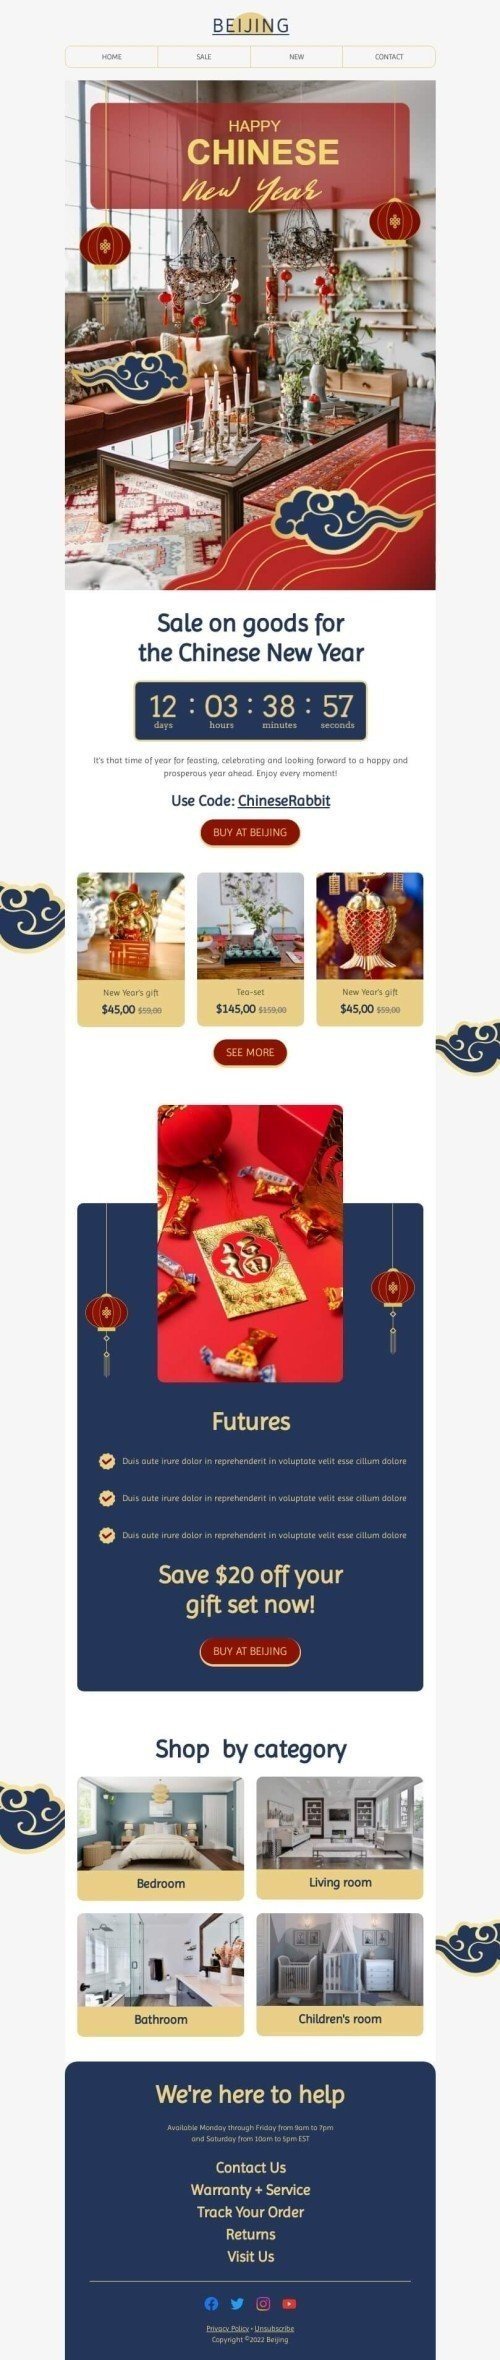 Chinese New Year email template "Chinese New Year miracle" for furniture, interior & DIY industry mobile view